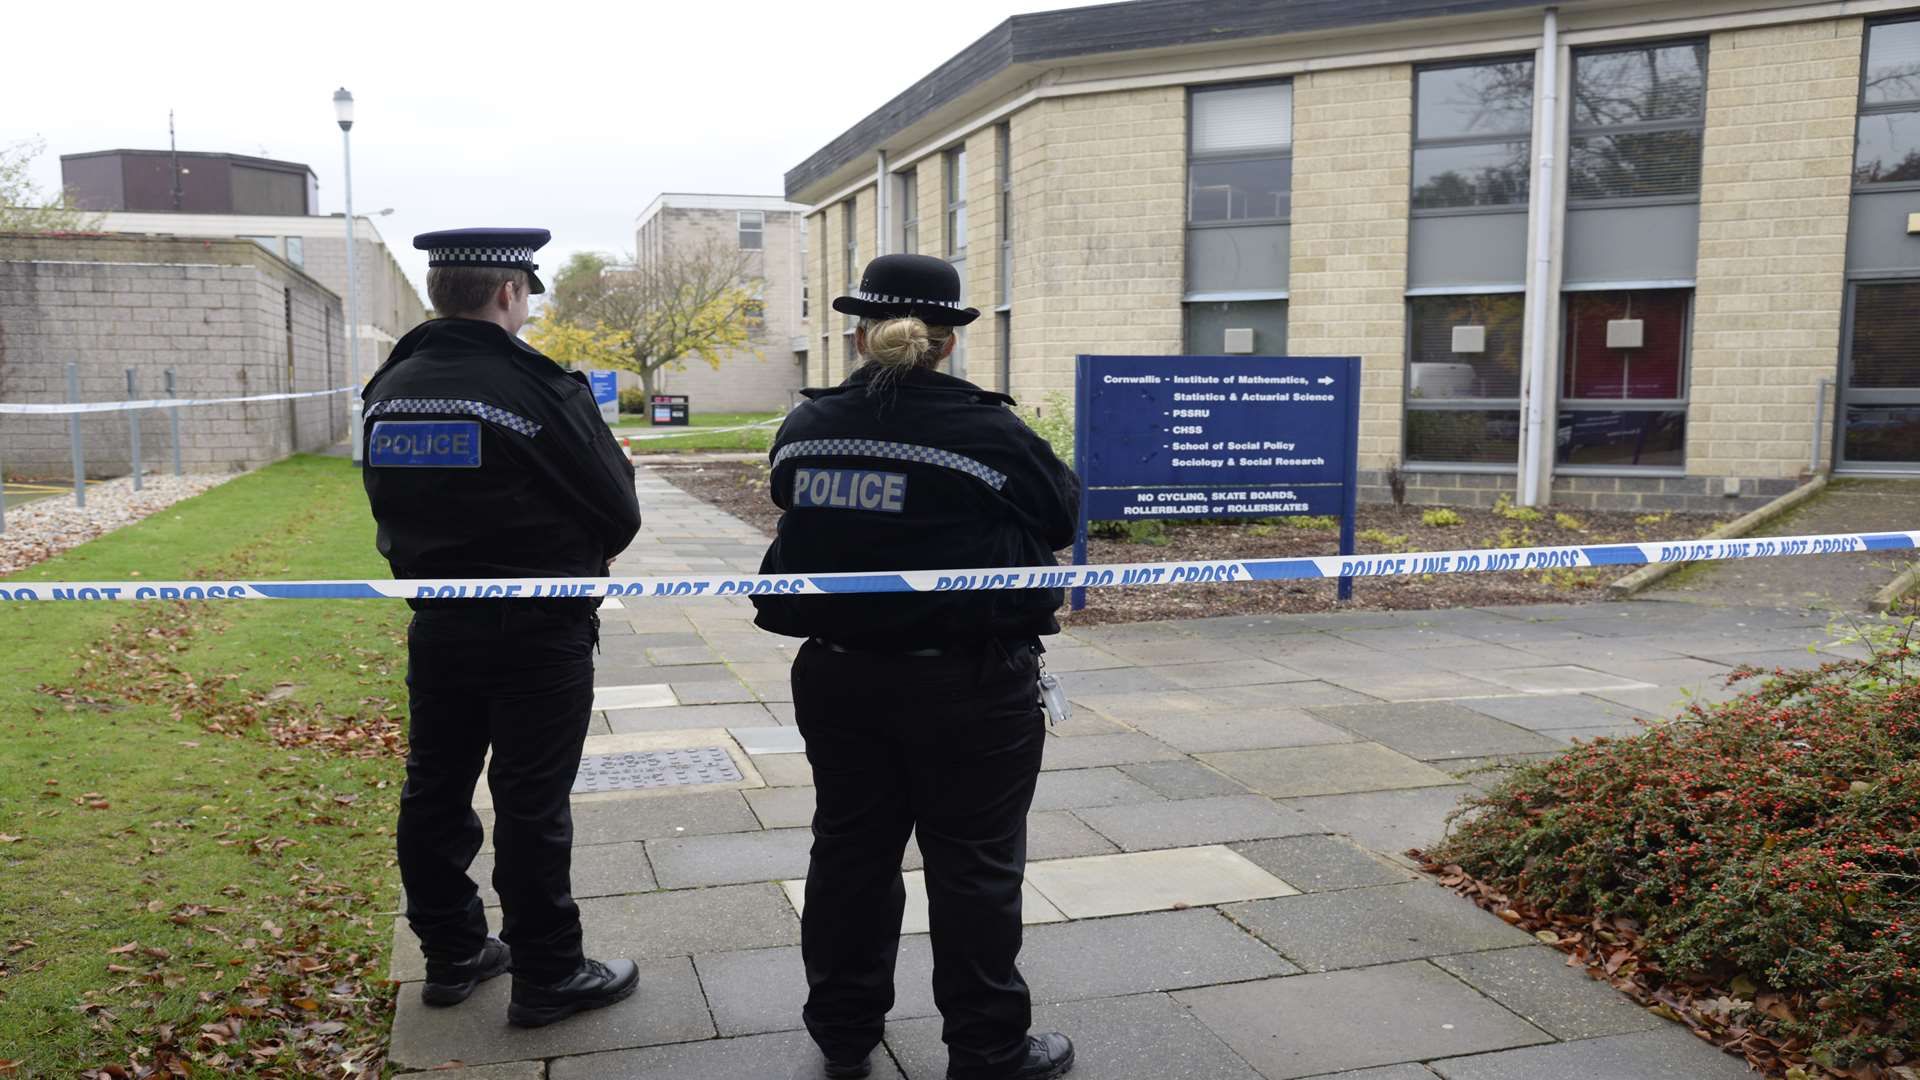 Police cordoned off an area in the University of Kent